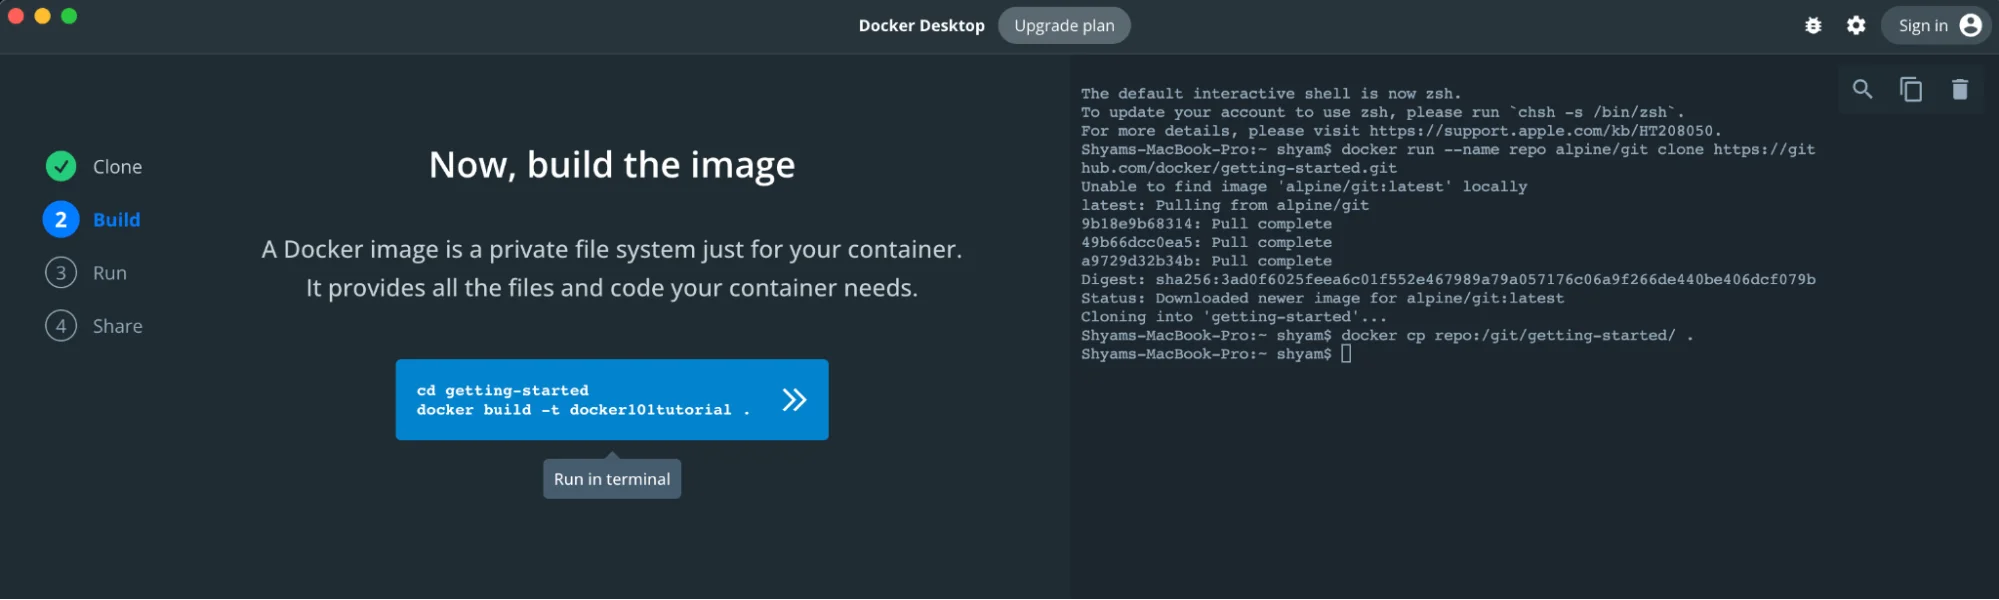 running your first container images in docker 08